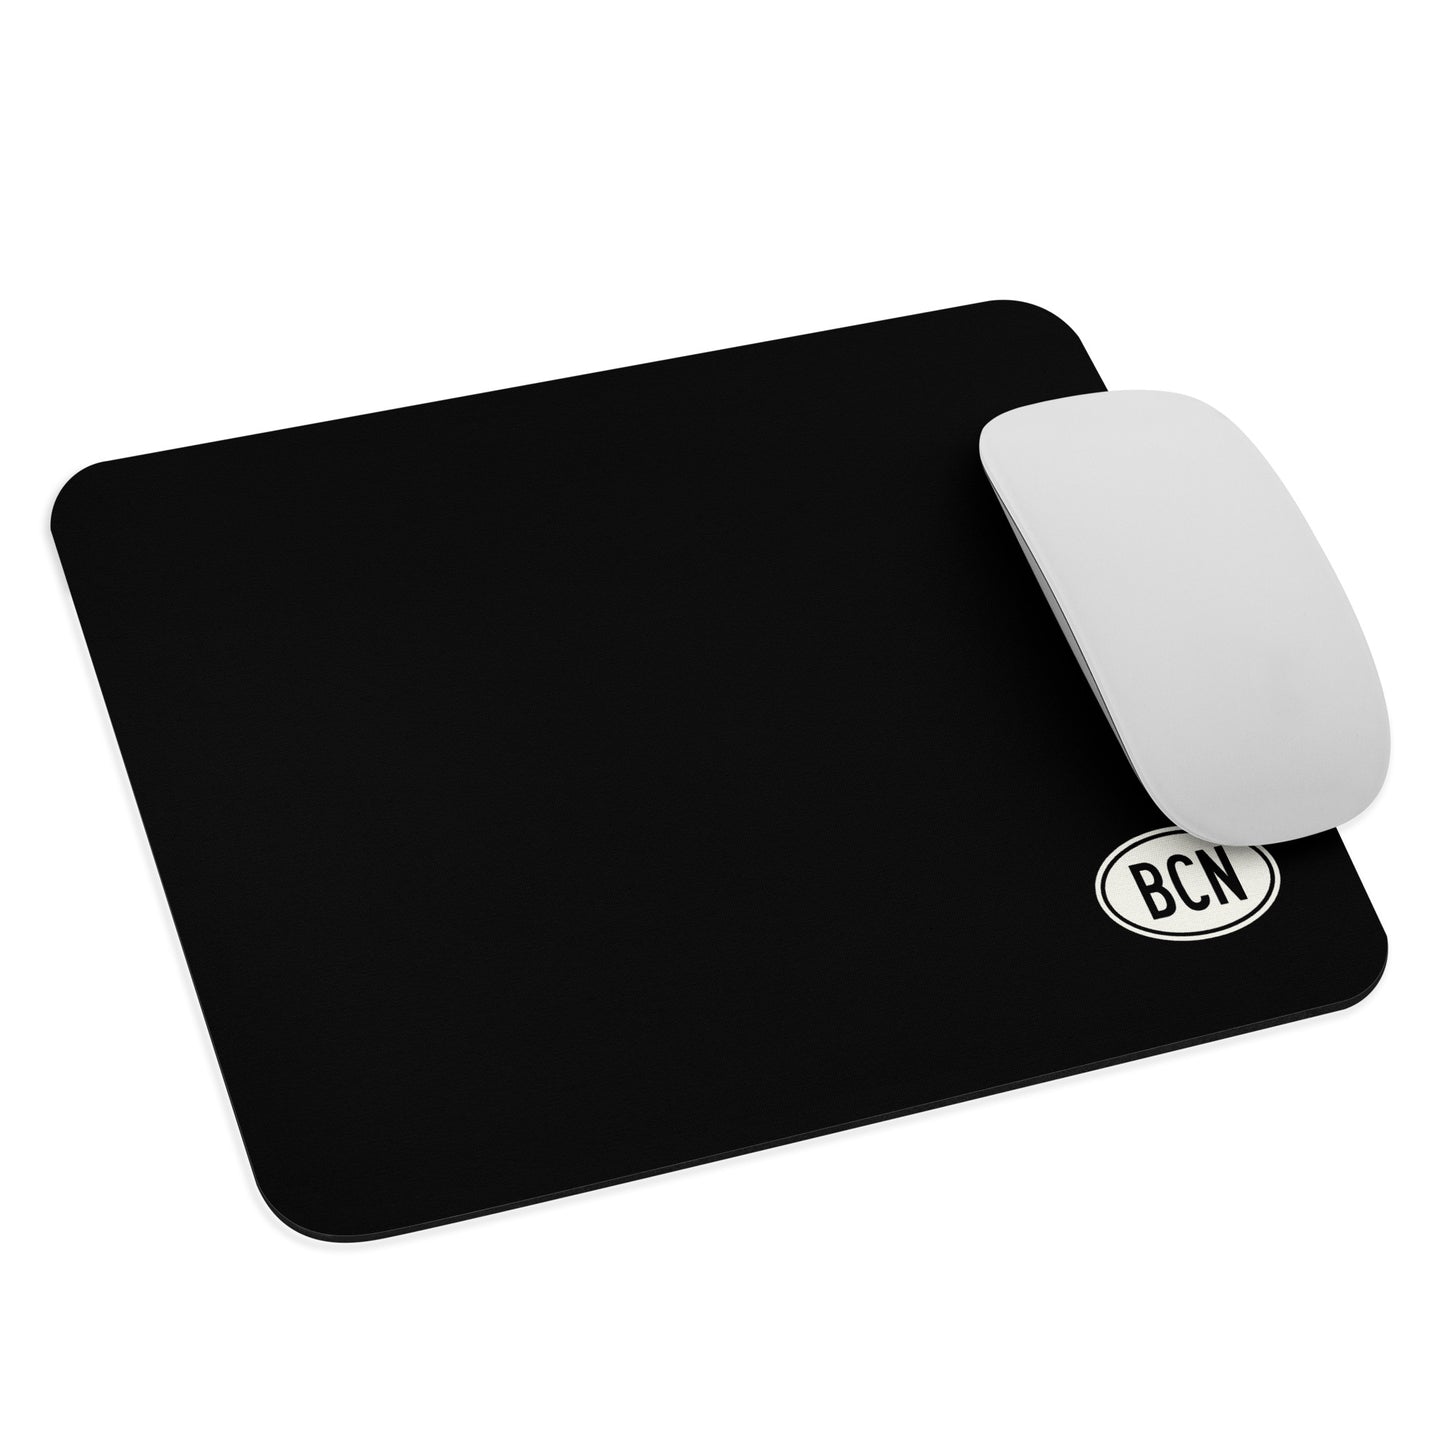 Unique Travel Gift Mouse Pad - White Oval • BCN Barcelona • YHM Designs - Image 03